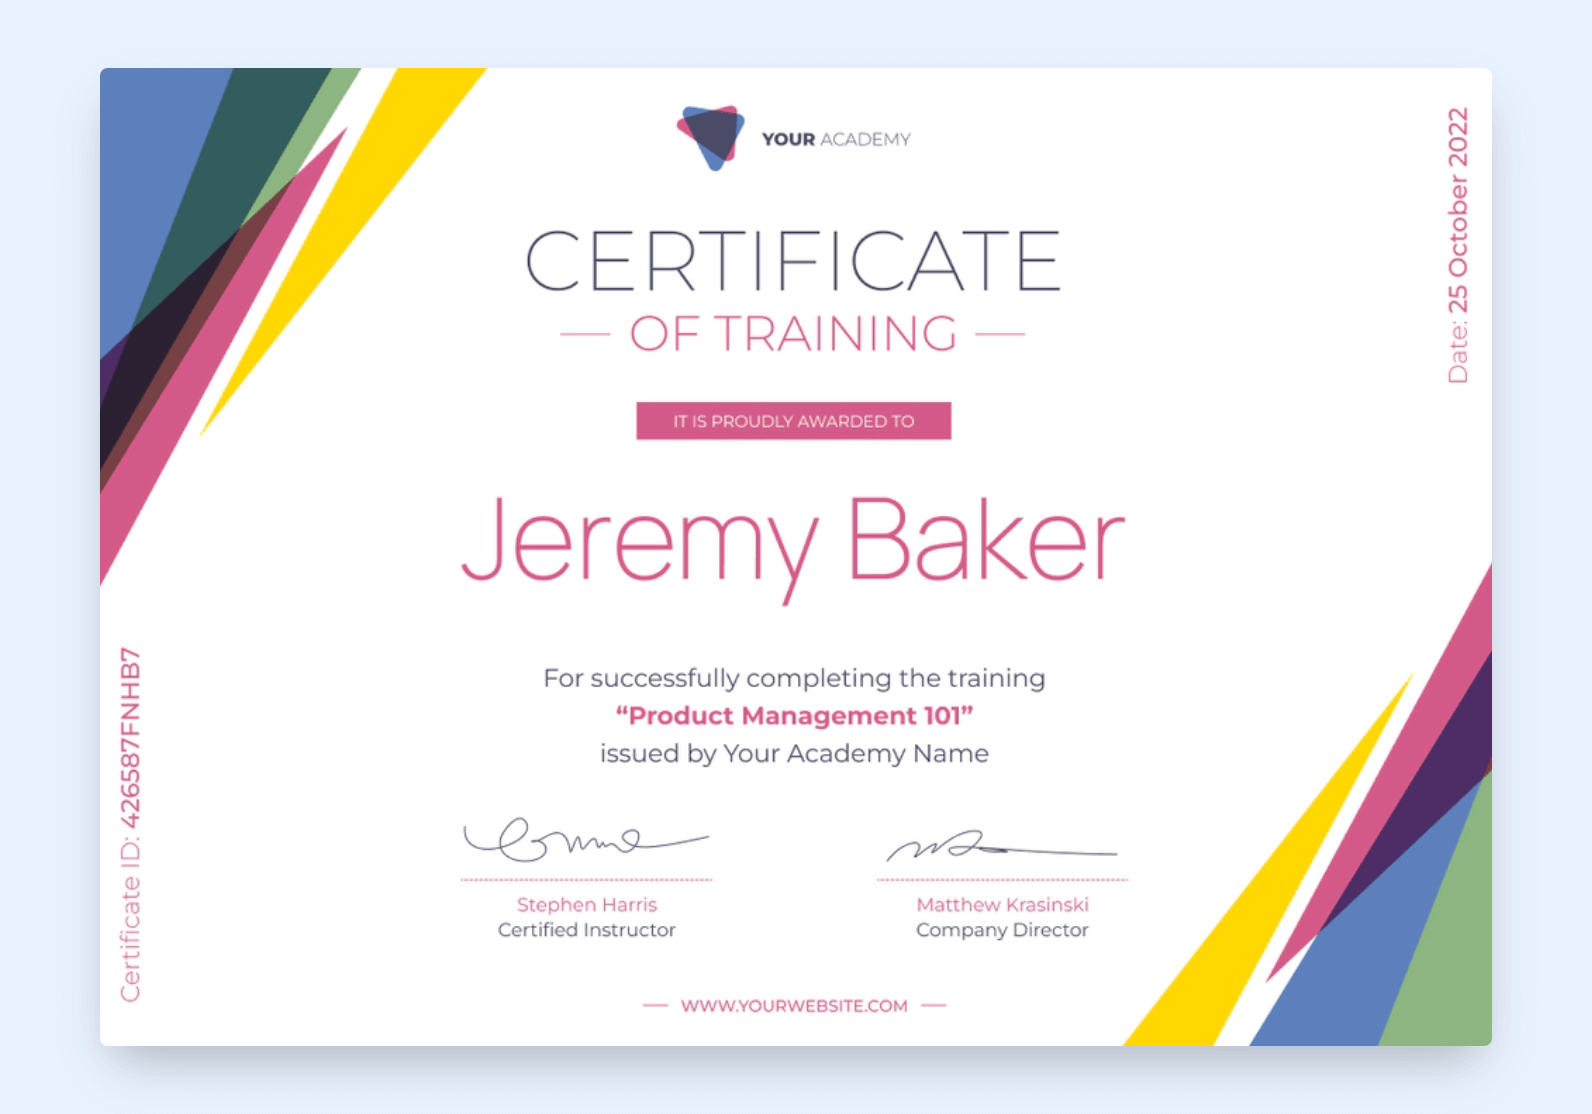 Certificate of training with colorful patterns on the corners.